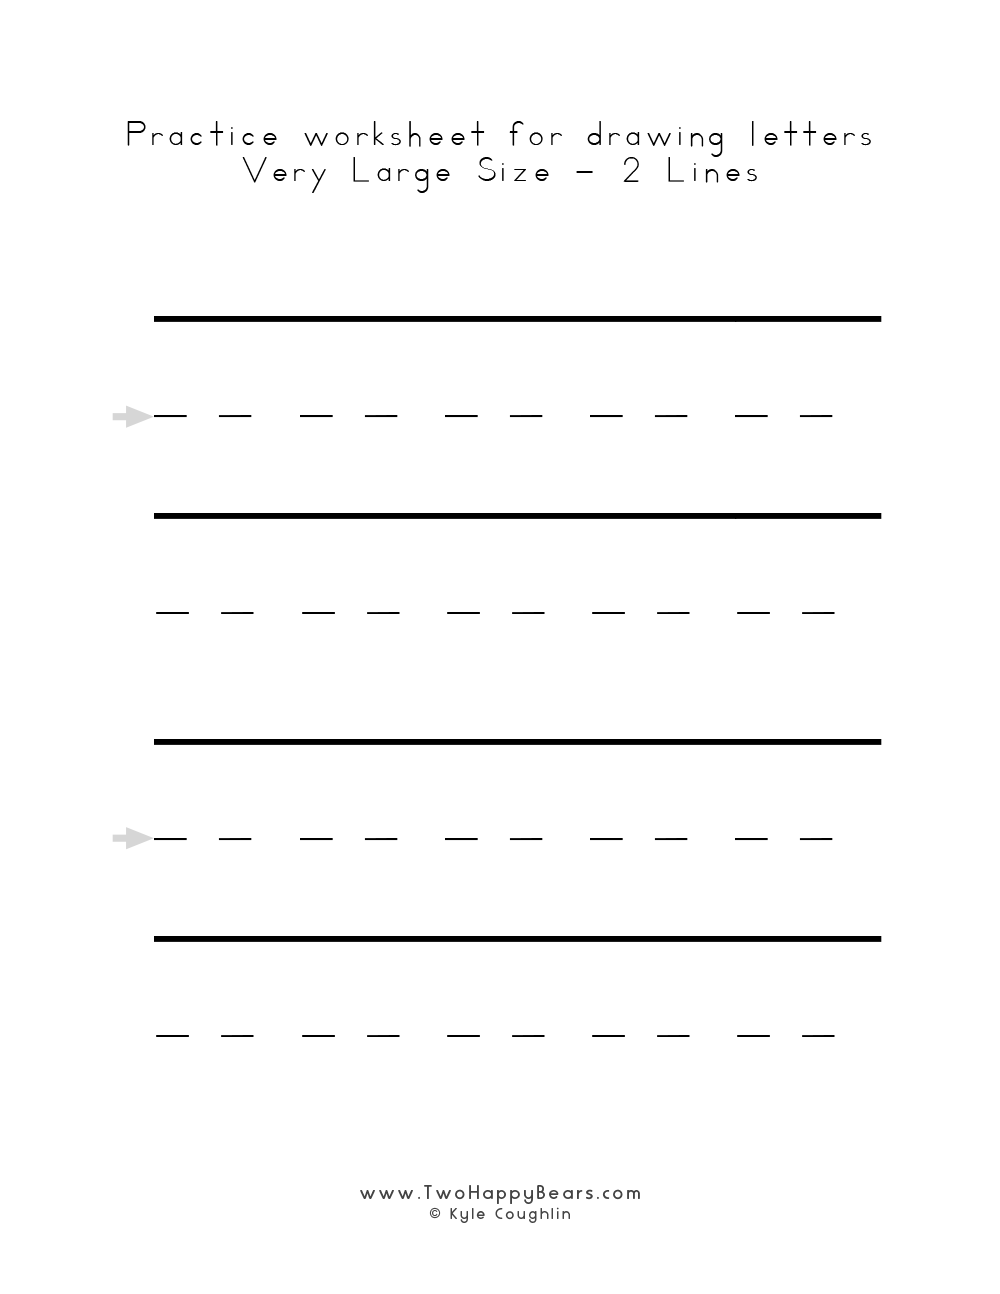 Very large blank line worksheets for drawing letters